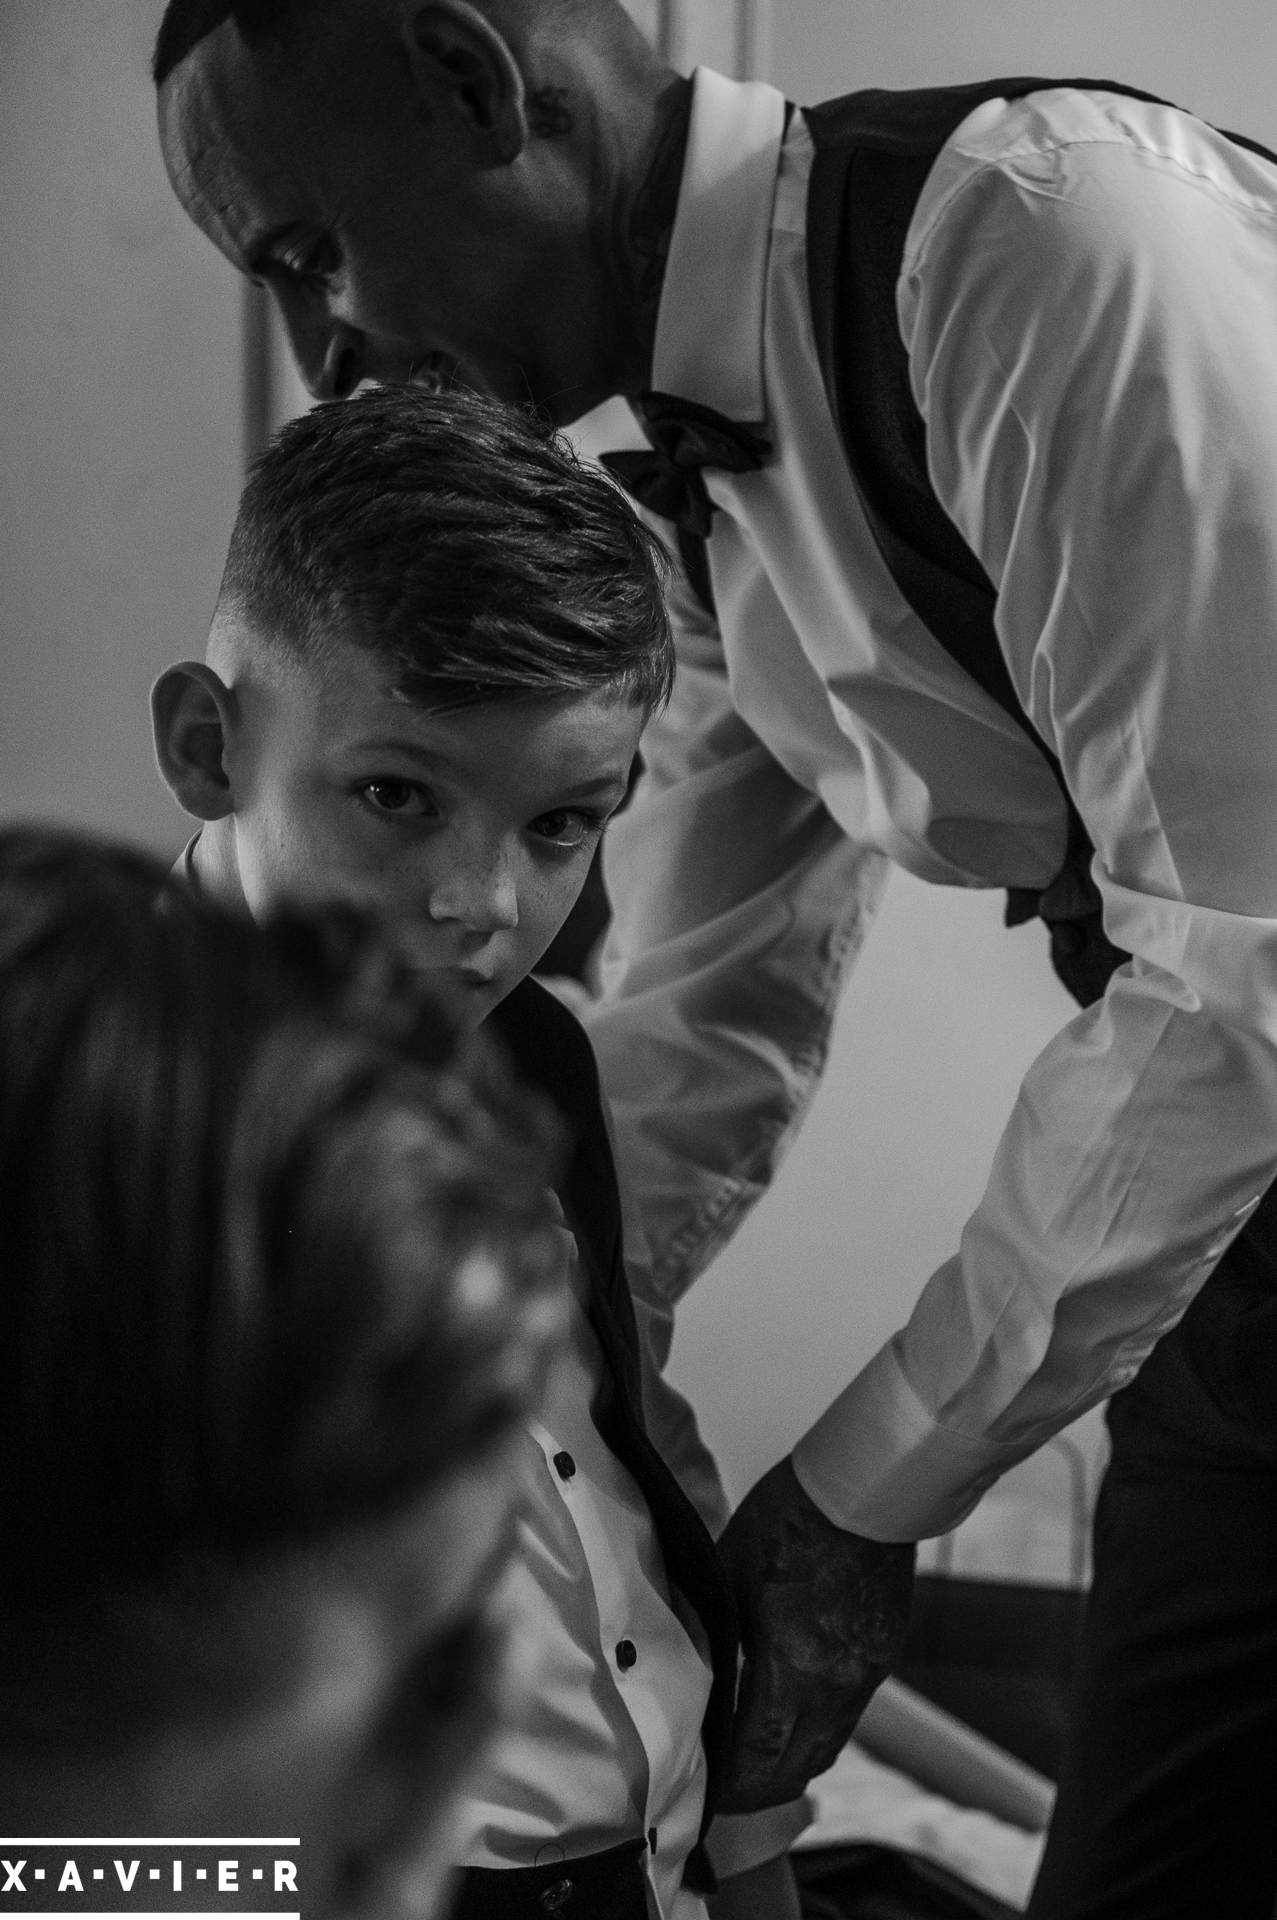 candid image of page boy being helped into his suit by the groom